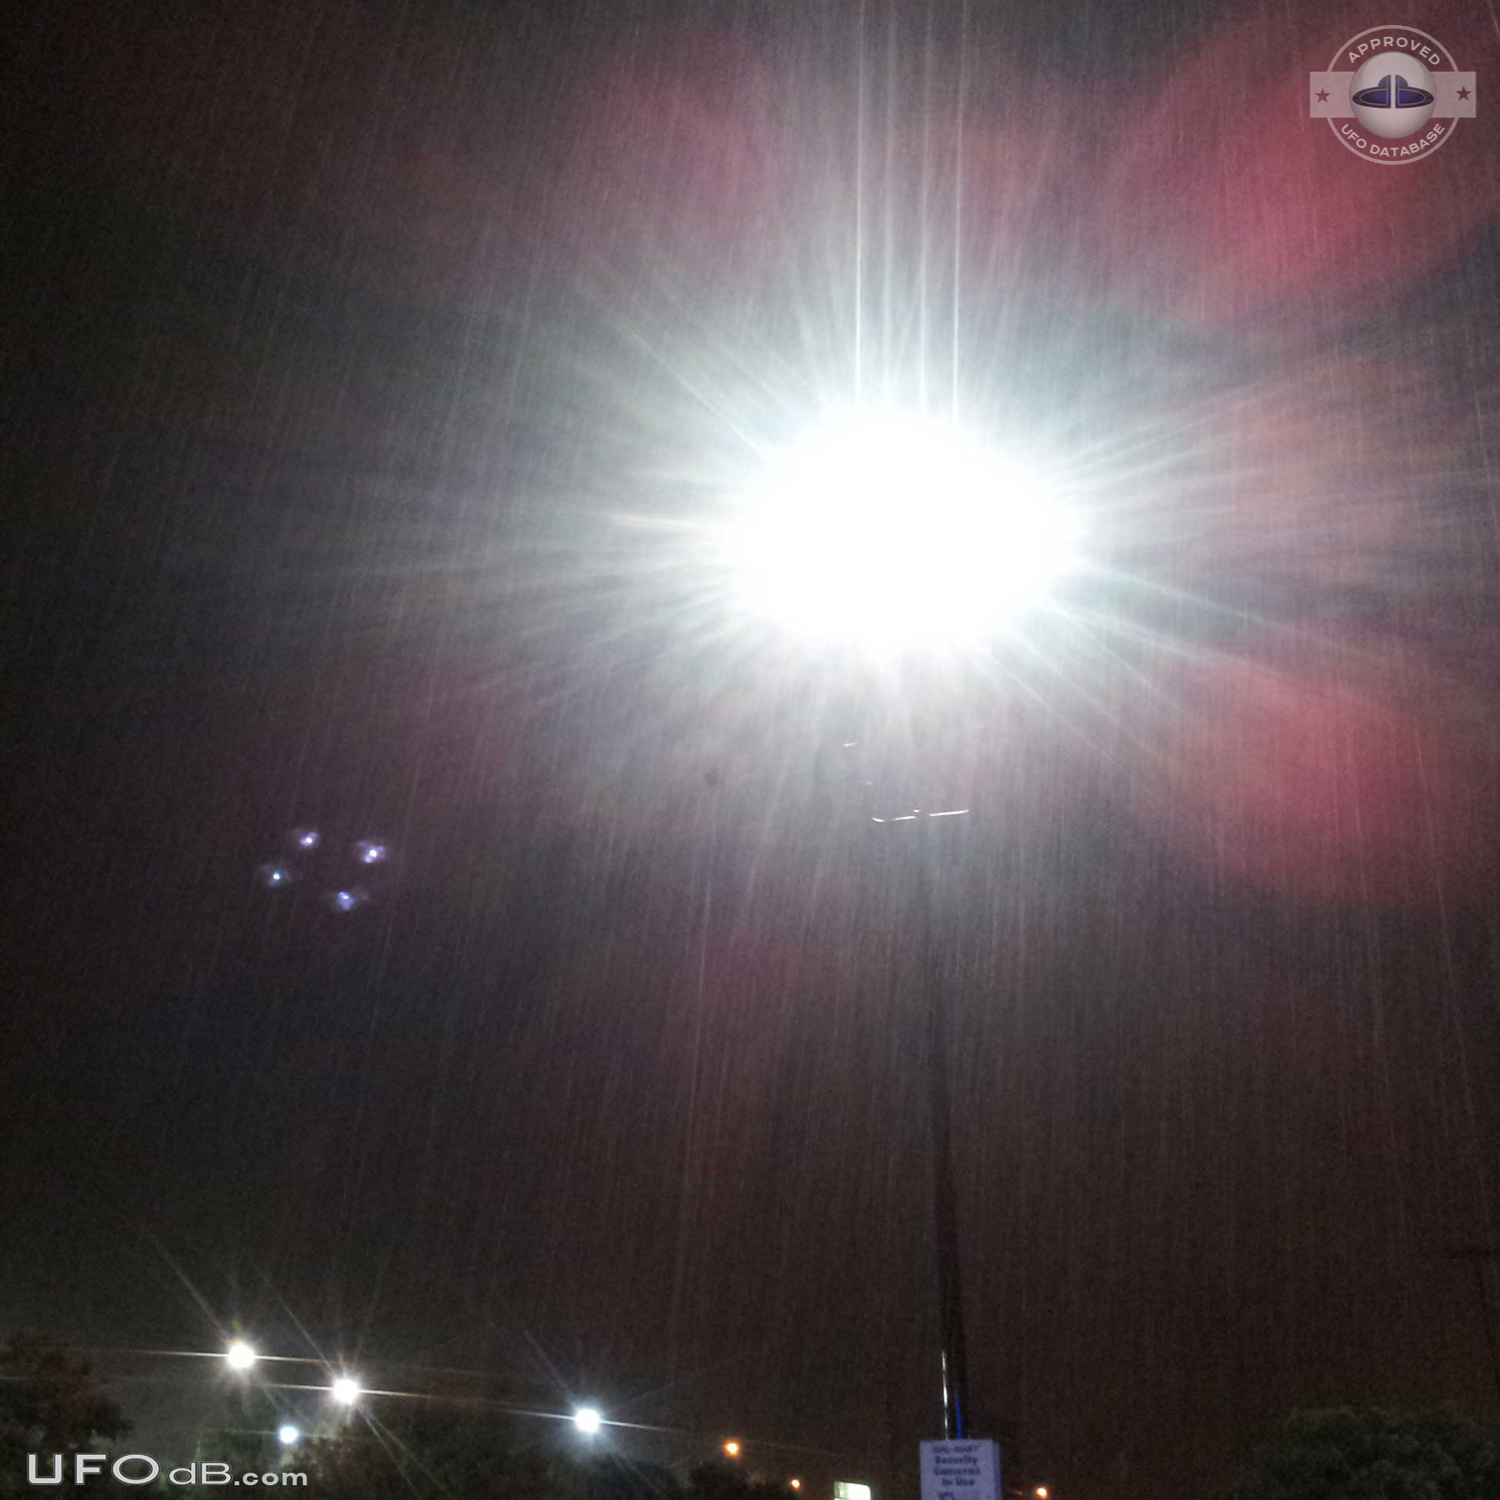 Square shaped UFO caught on picture during heavy rainfall - Rialto CA UFO Picture #384-1